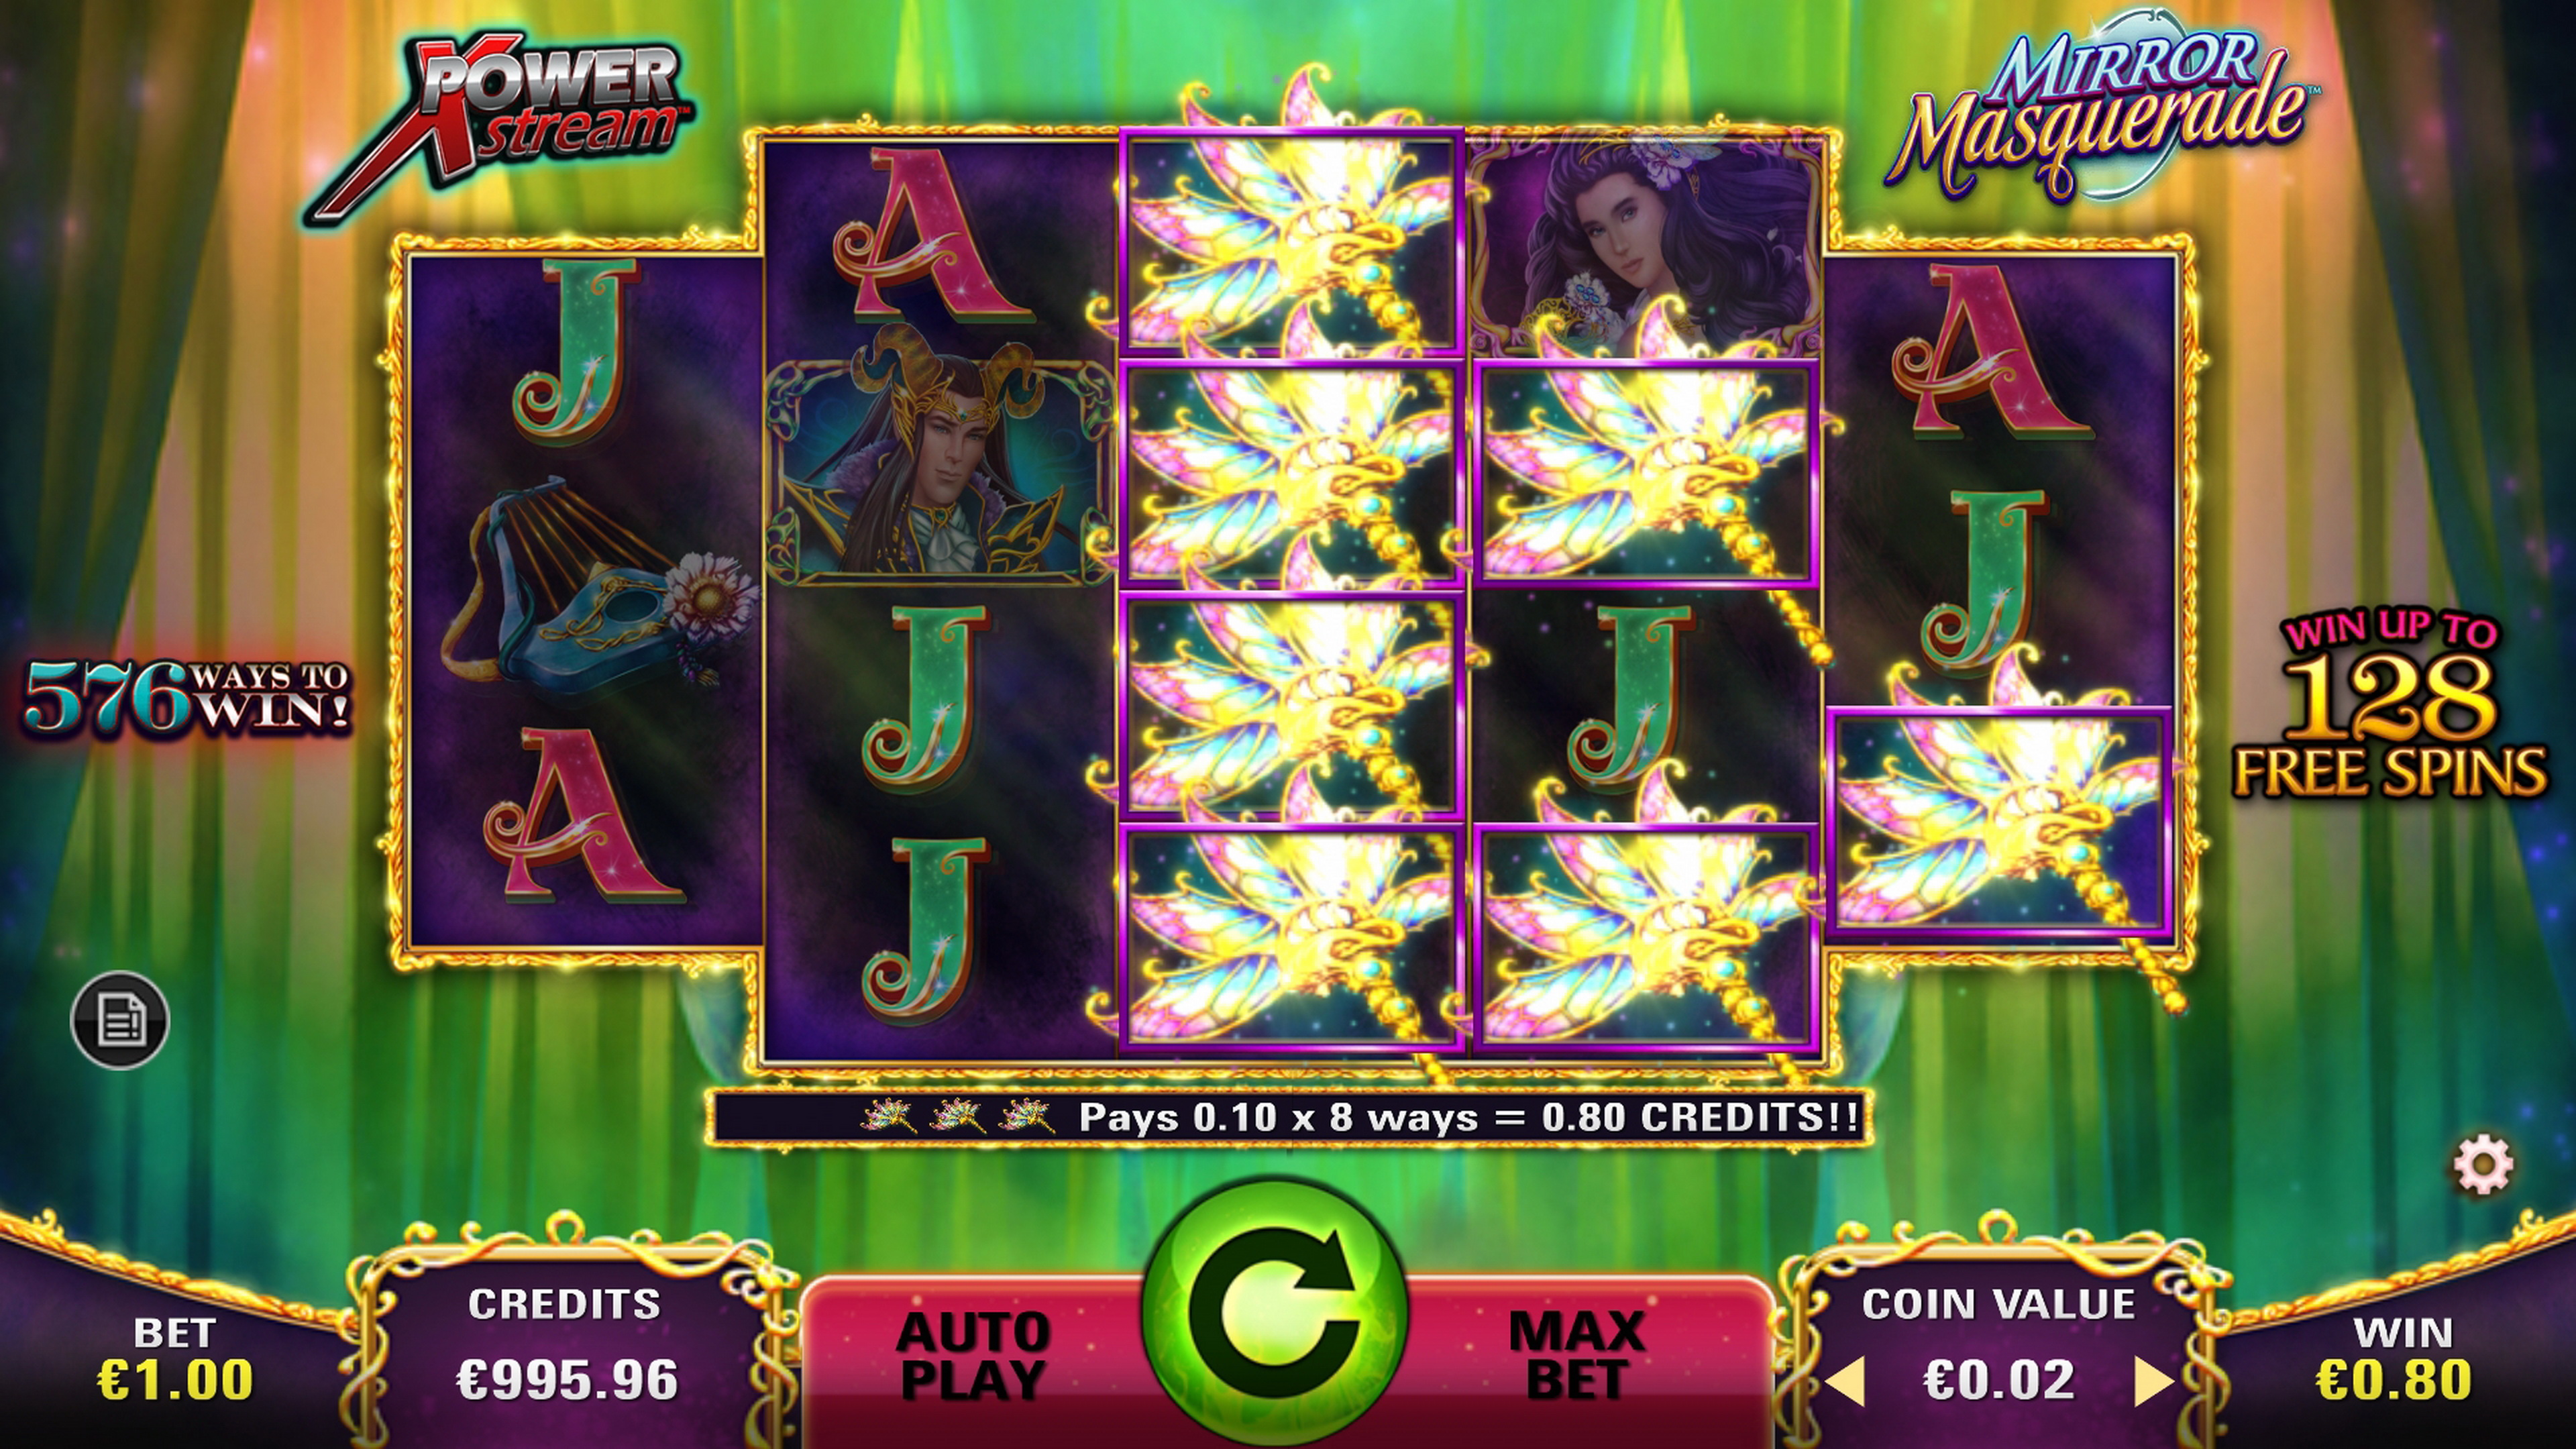 Win Money in Mirror Masquerade Free Slot Game by AGS